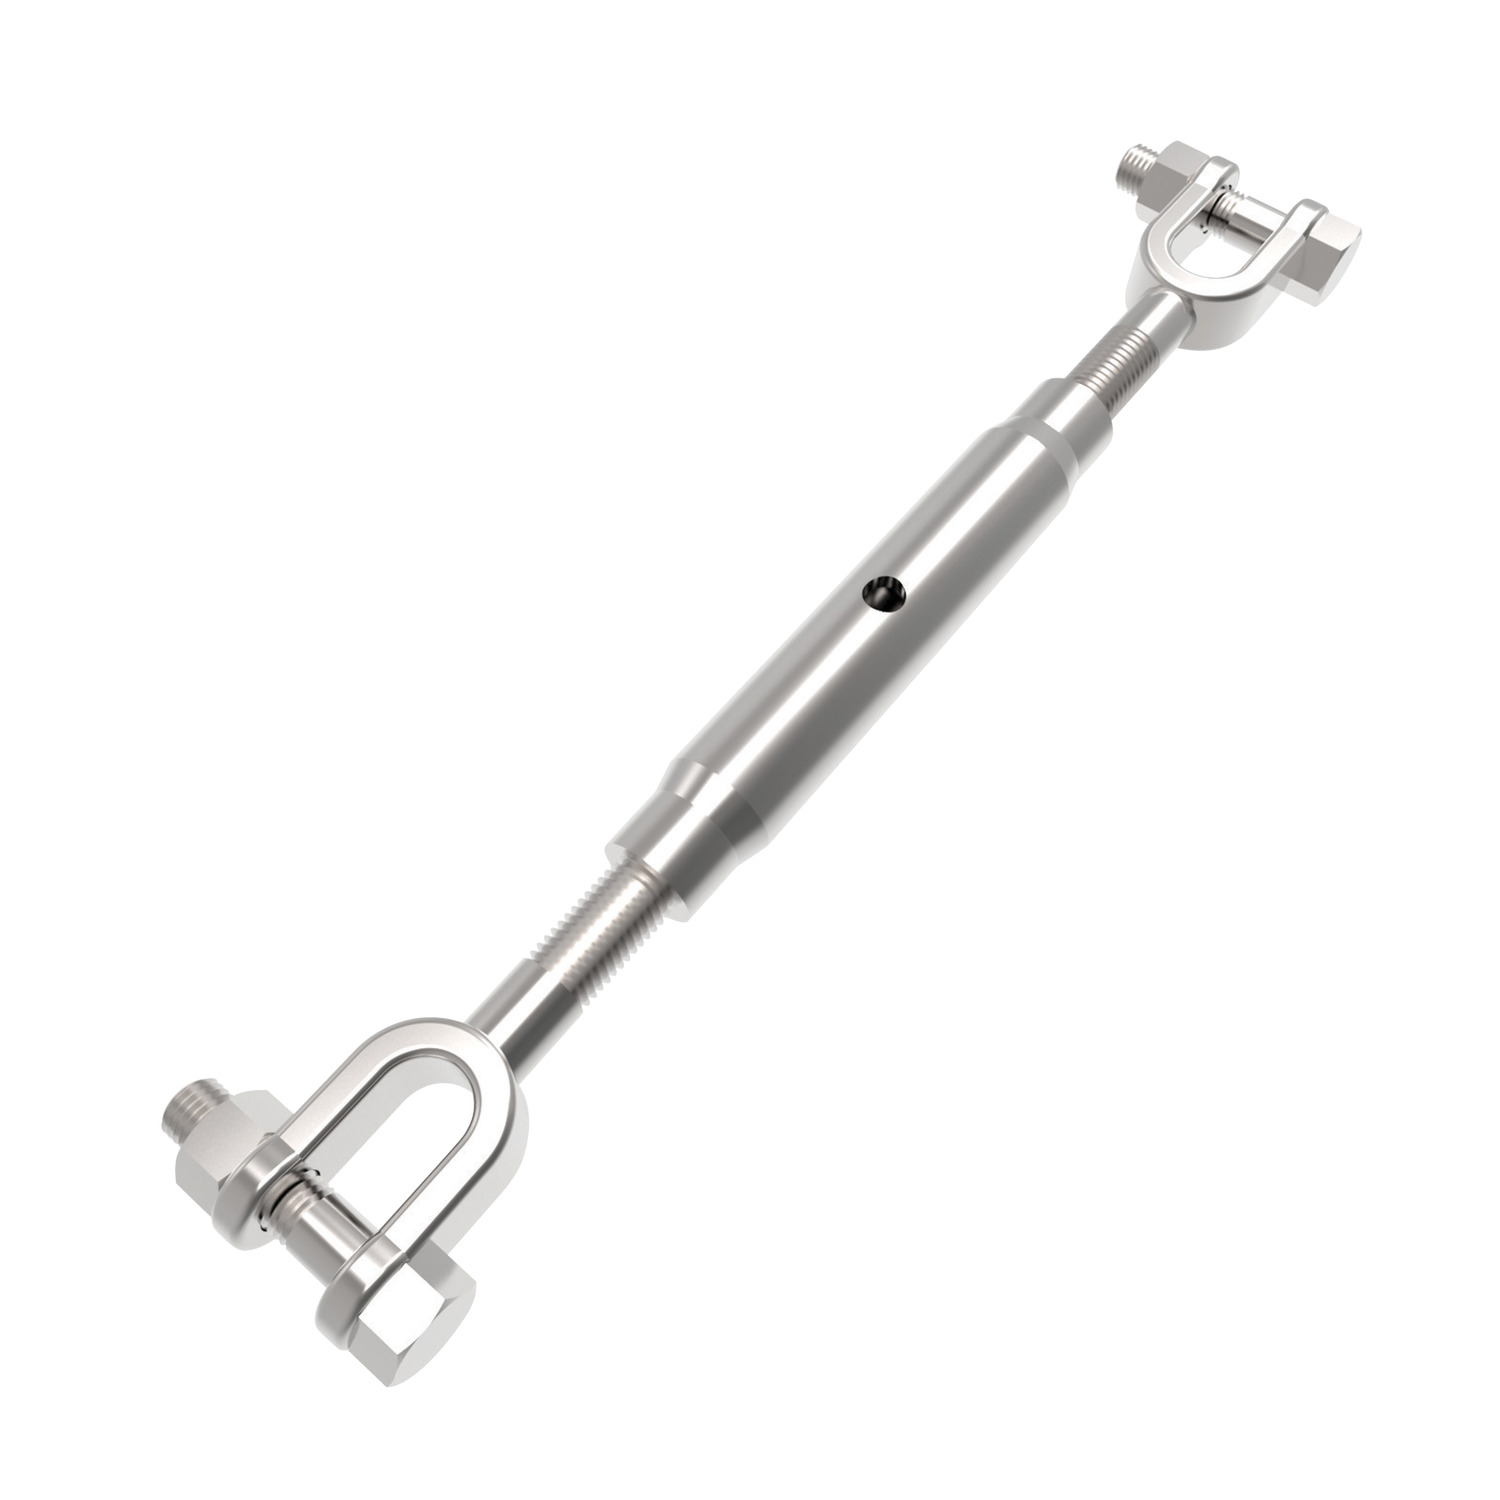 R3820.008-ZP Jaw End Pipe Body Turnbuckles M8 steel Not to be used for lifting unless SWL marked.